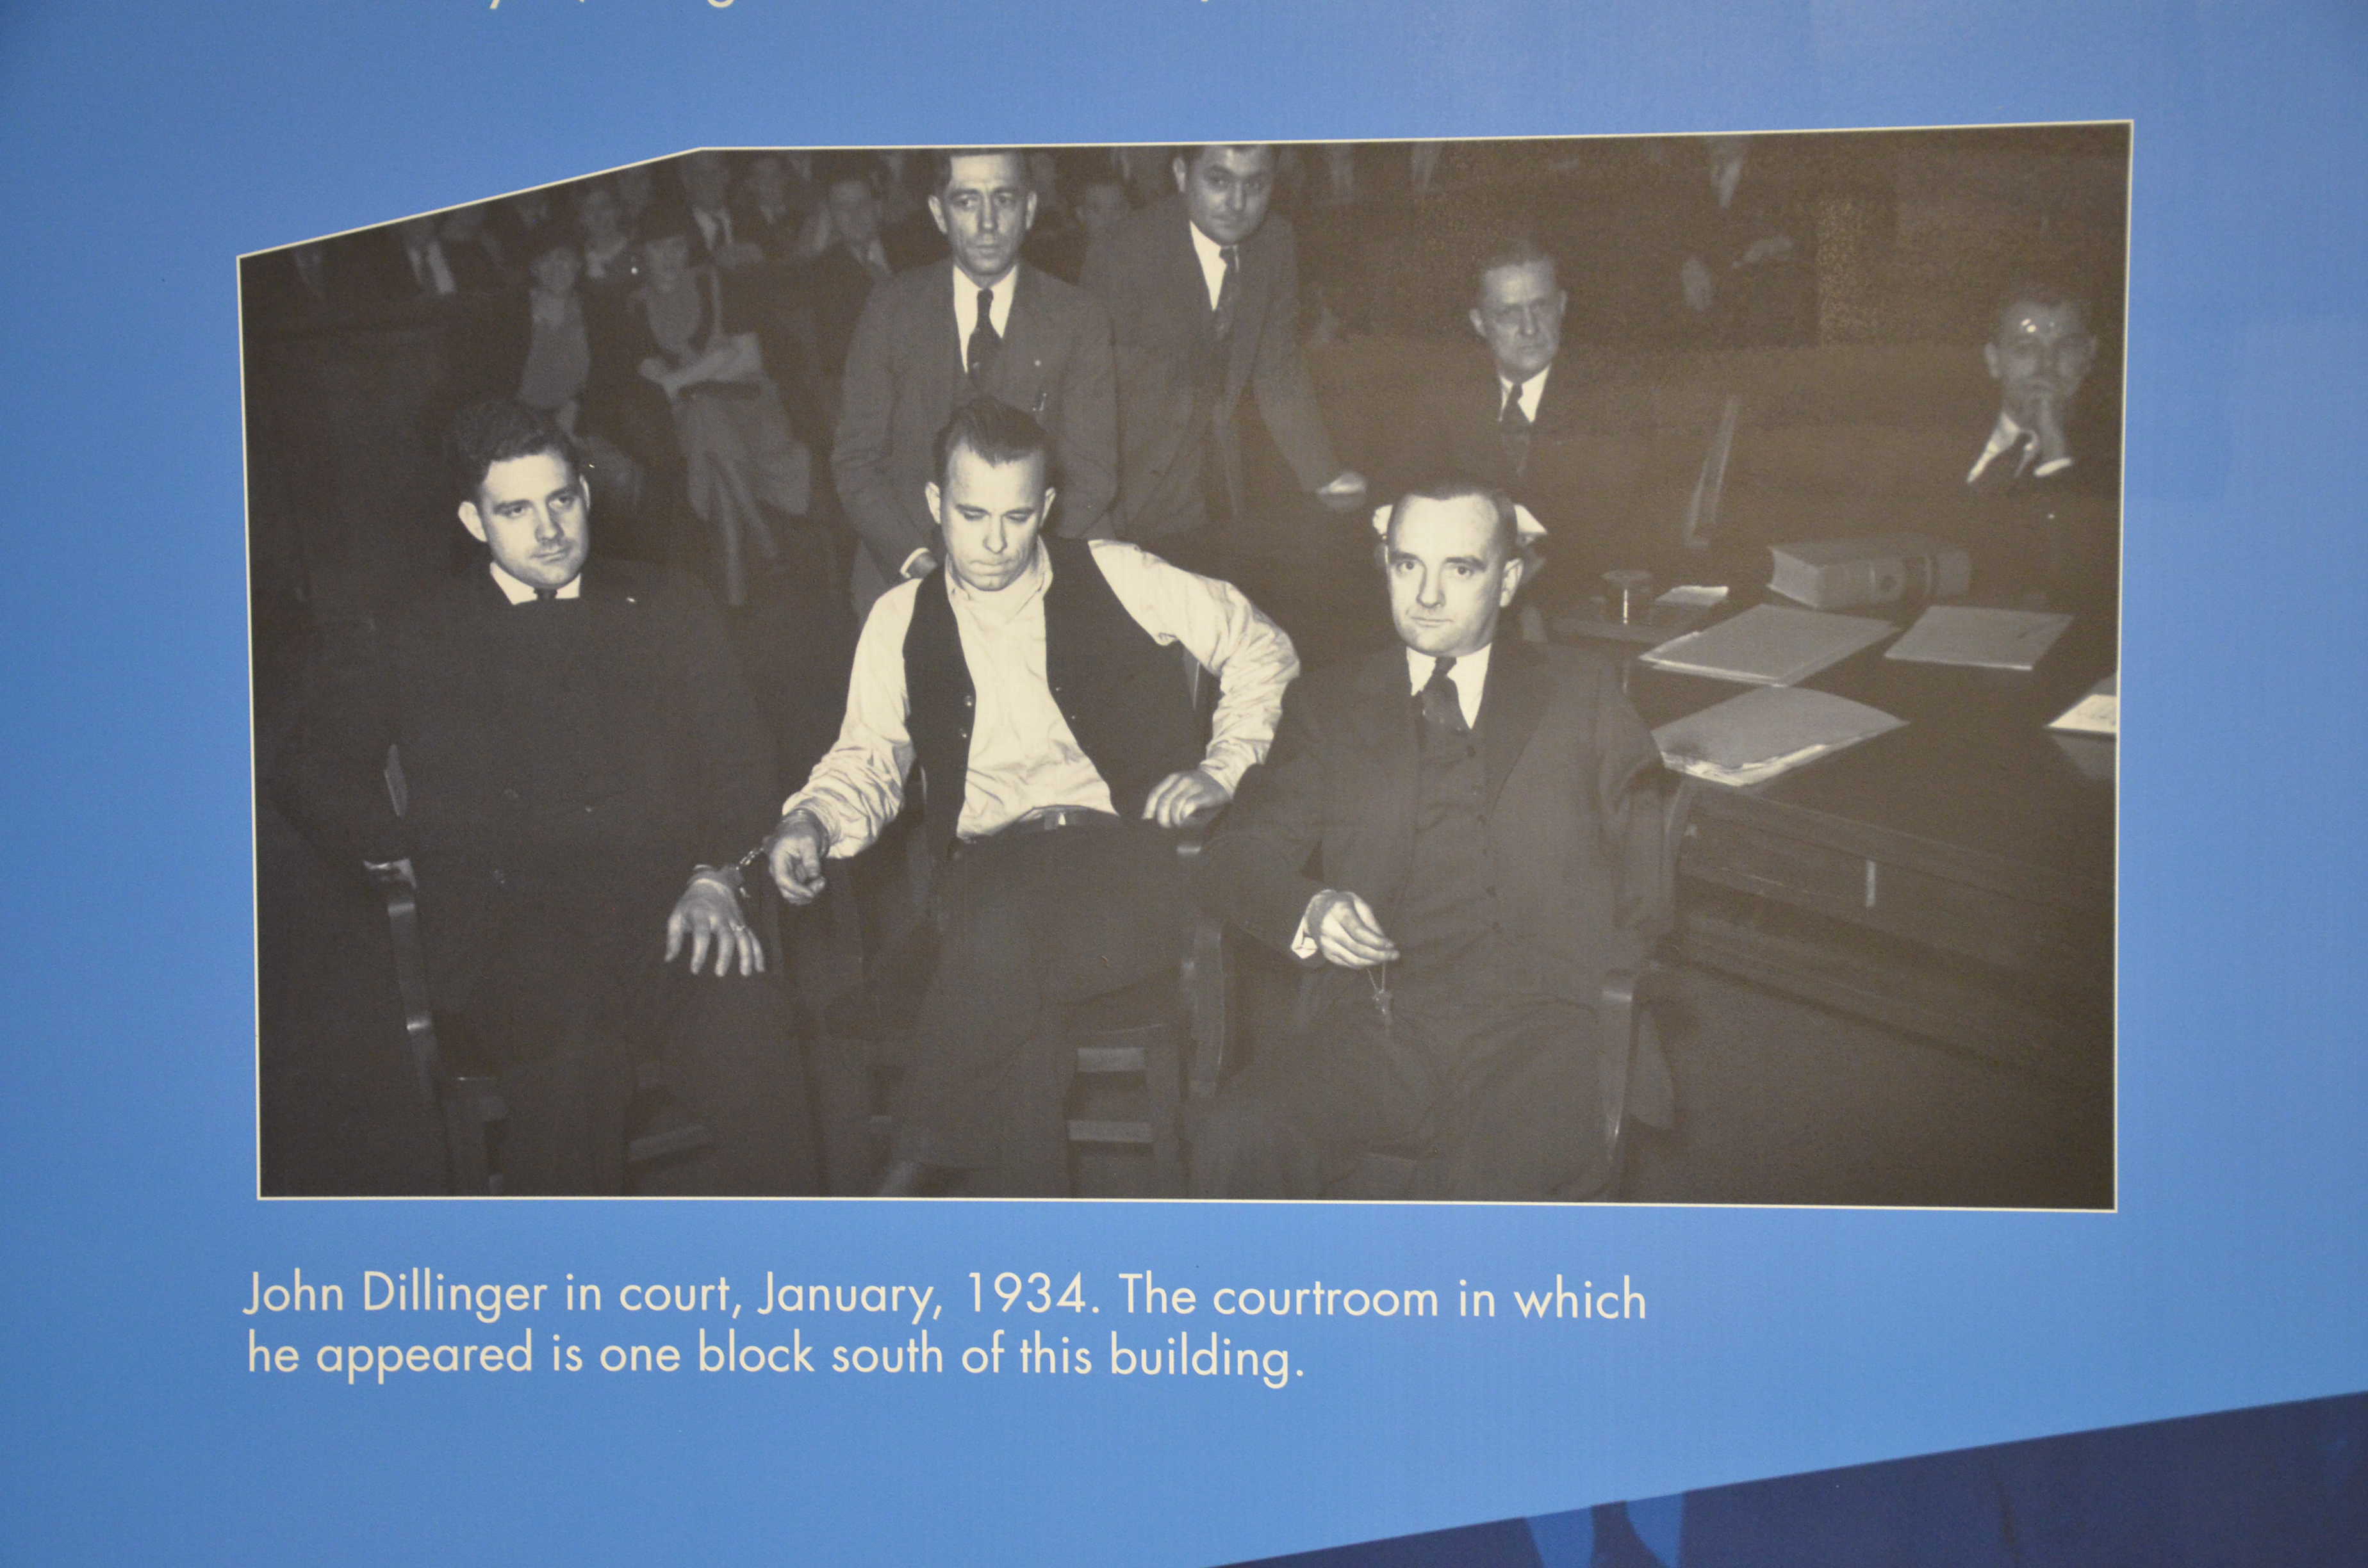 Dillinger at his court appearance at the John Dillinger Museum in Crown Point, Indiana